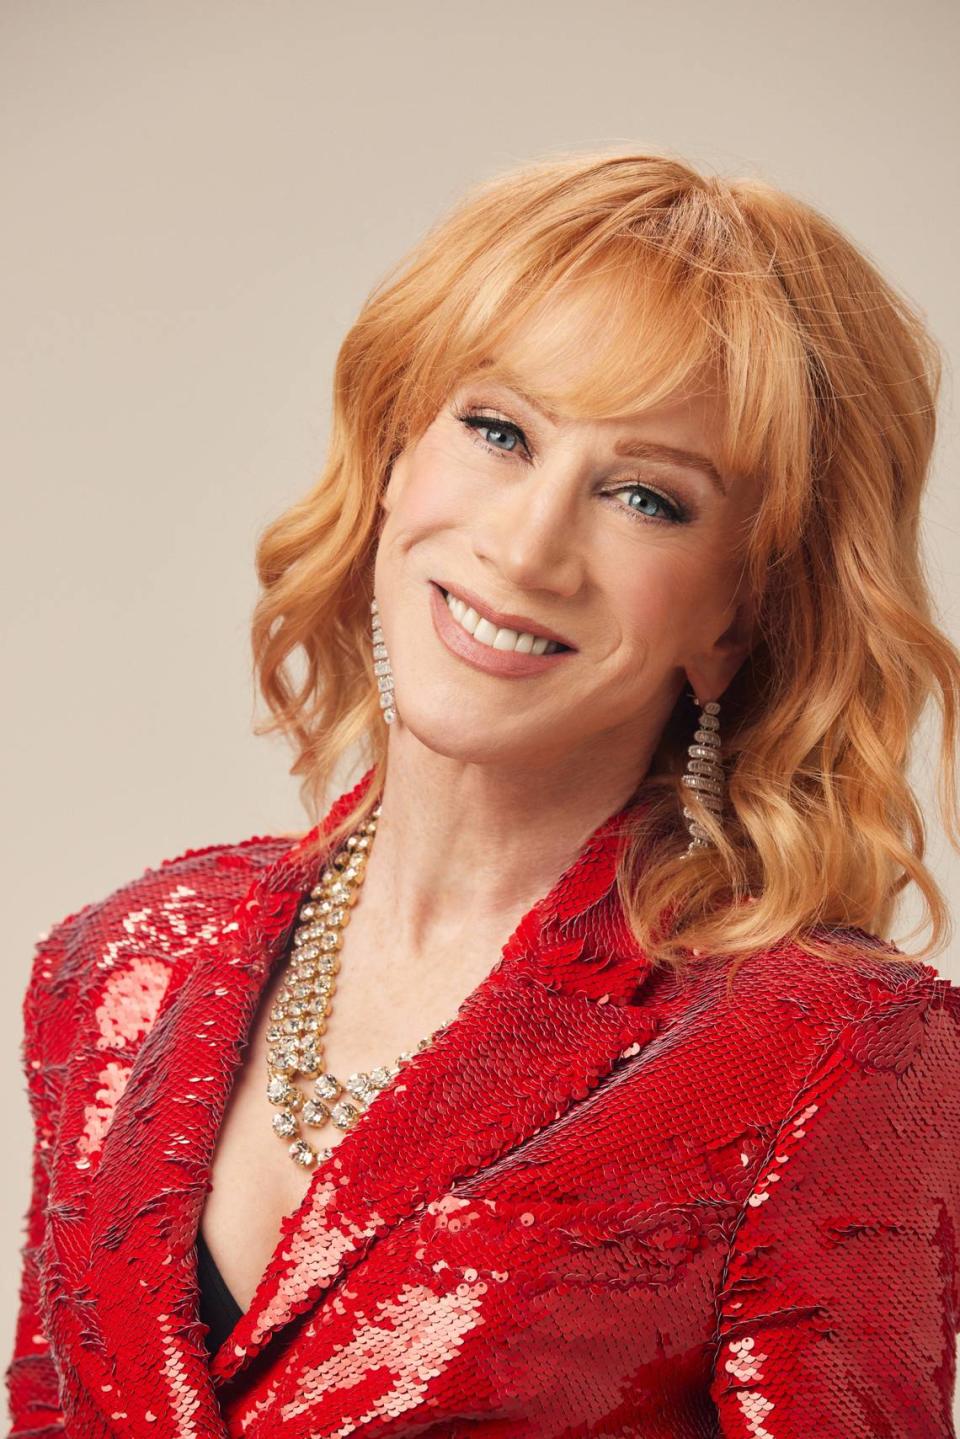 Actress, author, reality show star, comedian and pop culture commentator Kathy Griffin is back on the road with a new comedy tour. The shows feature a new voice from Griffin, who recovered from lung cancer.